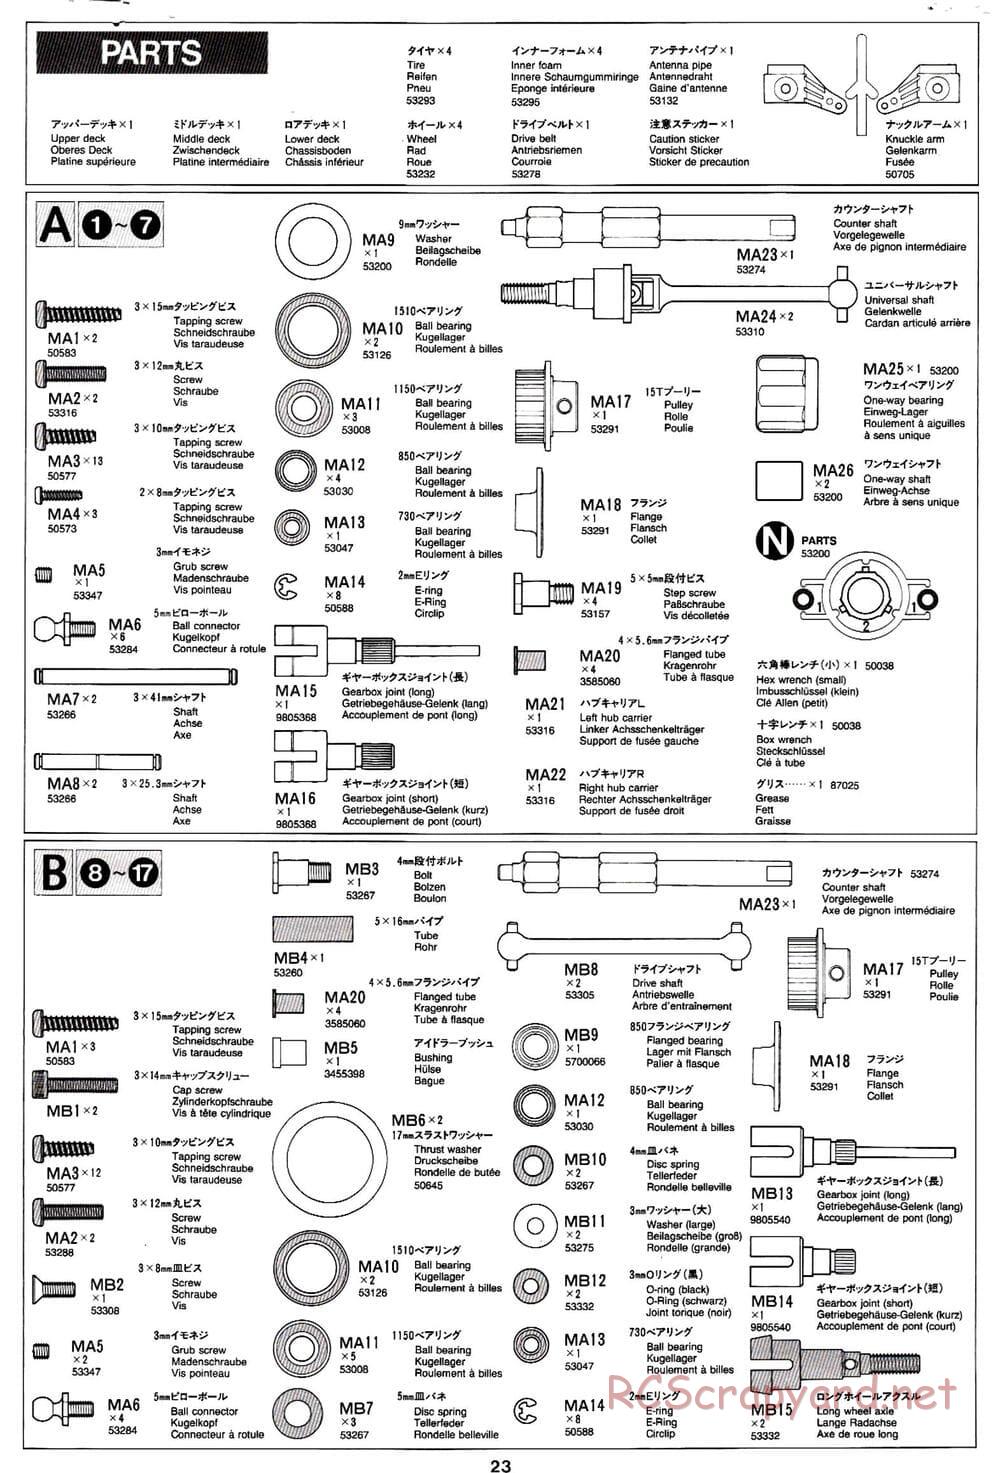 Tamiya - TA-03R TRF Special Edition Chassis - Manual - Page 23